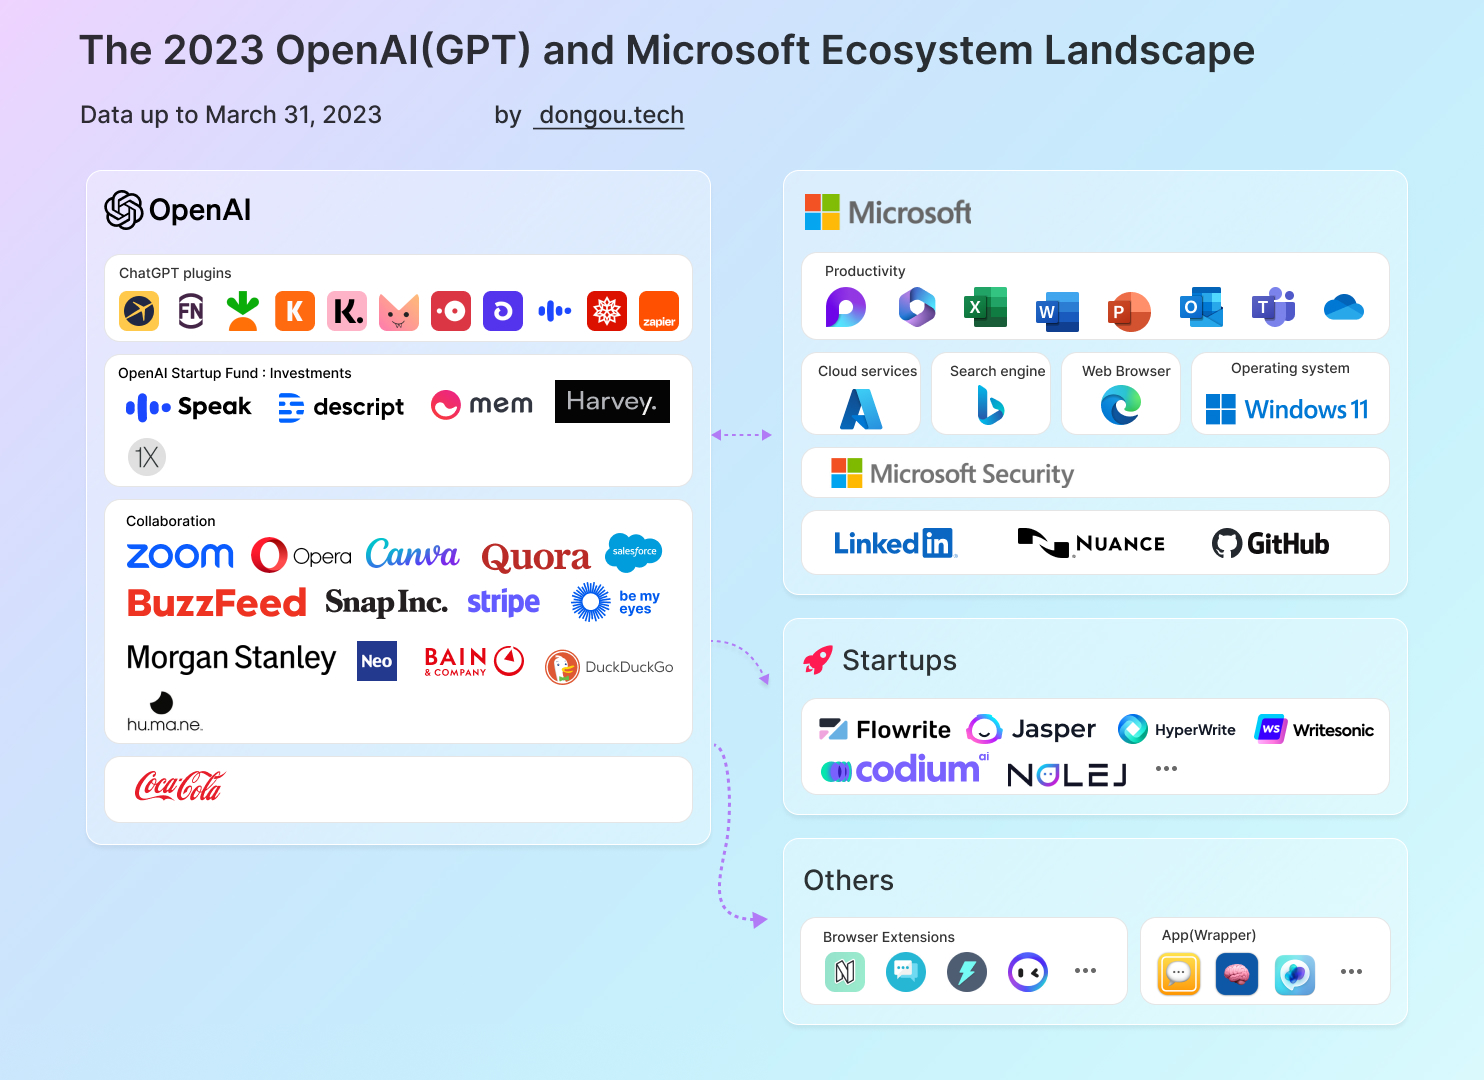 The 2023 OpenAI(GPT) and Microsoft Ecosystem Landscape by dongou.tech